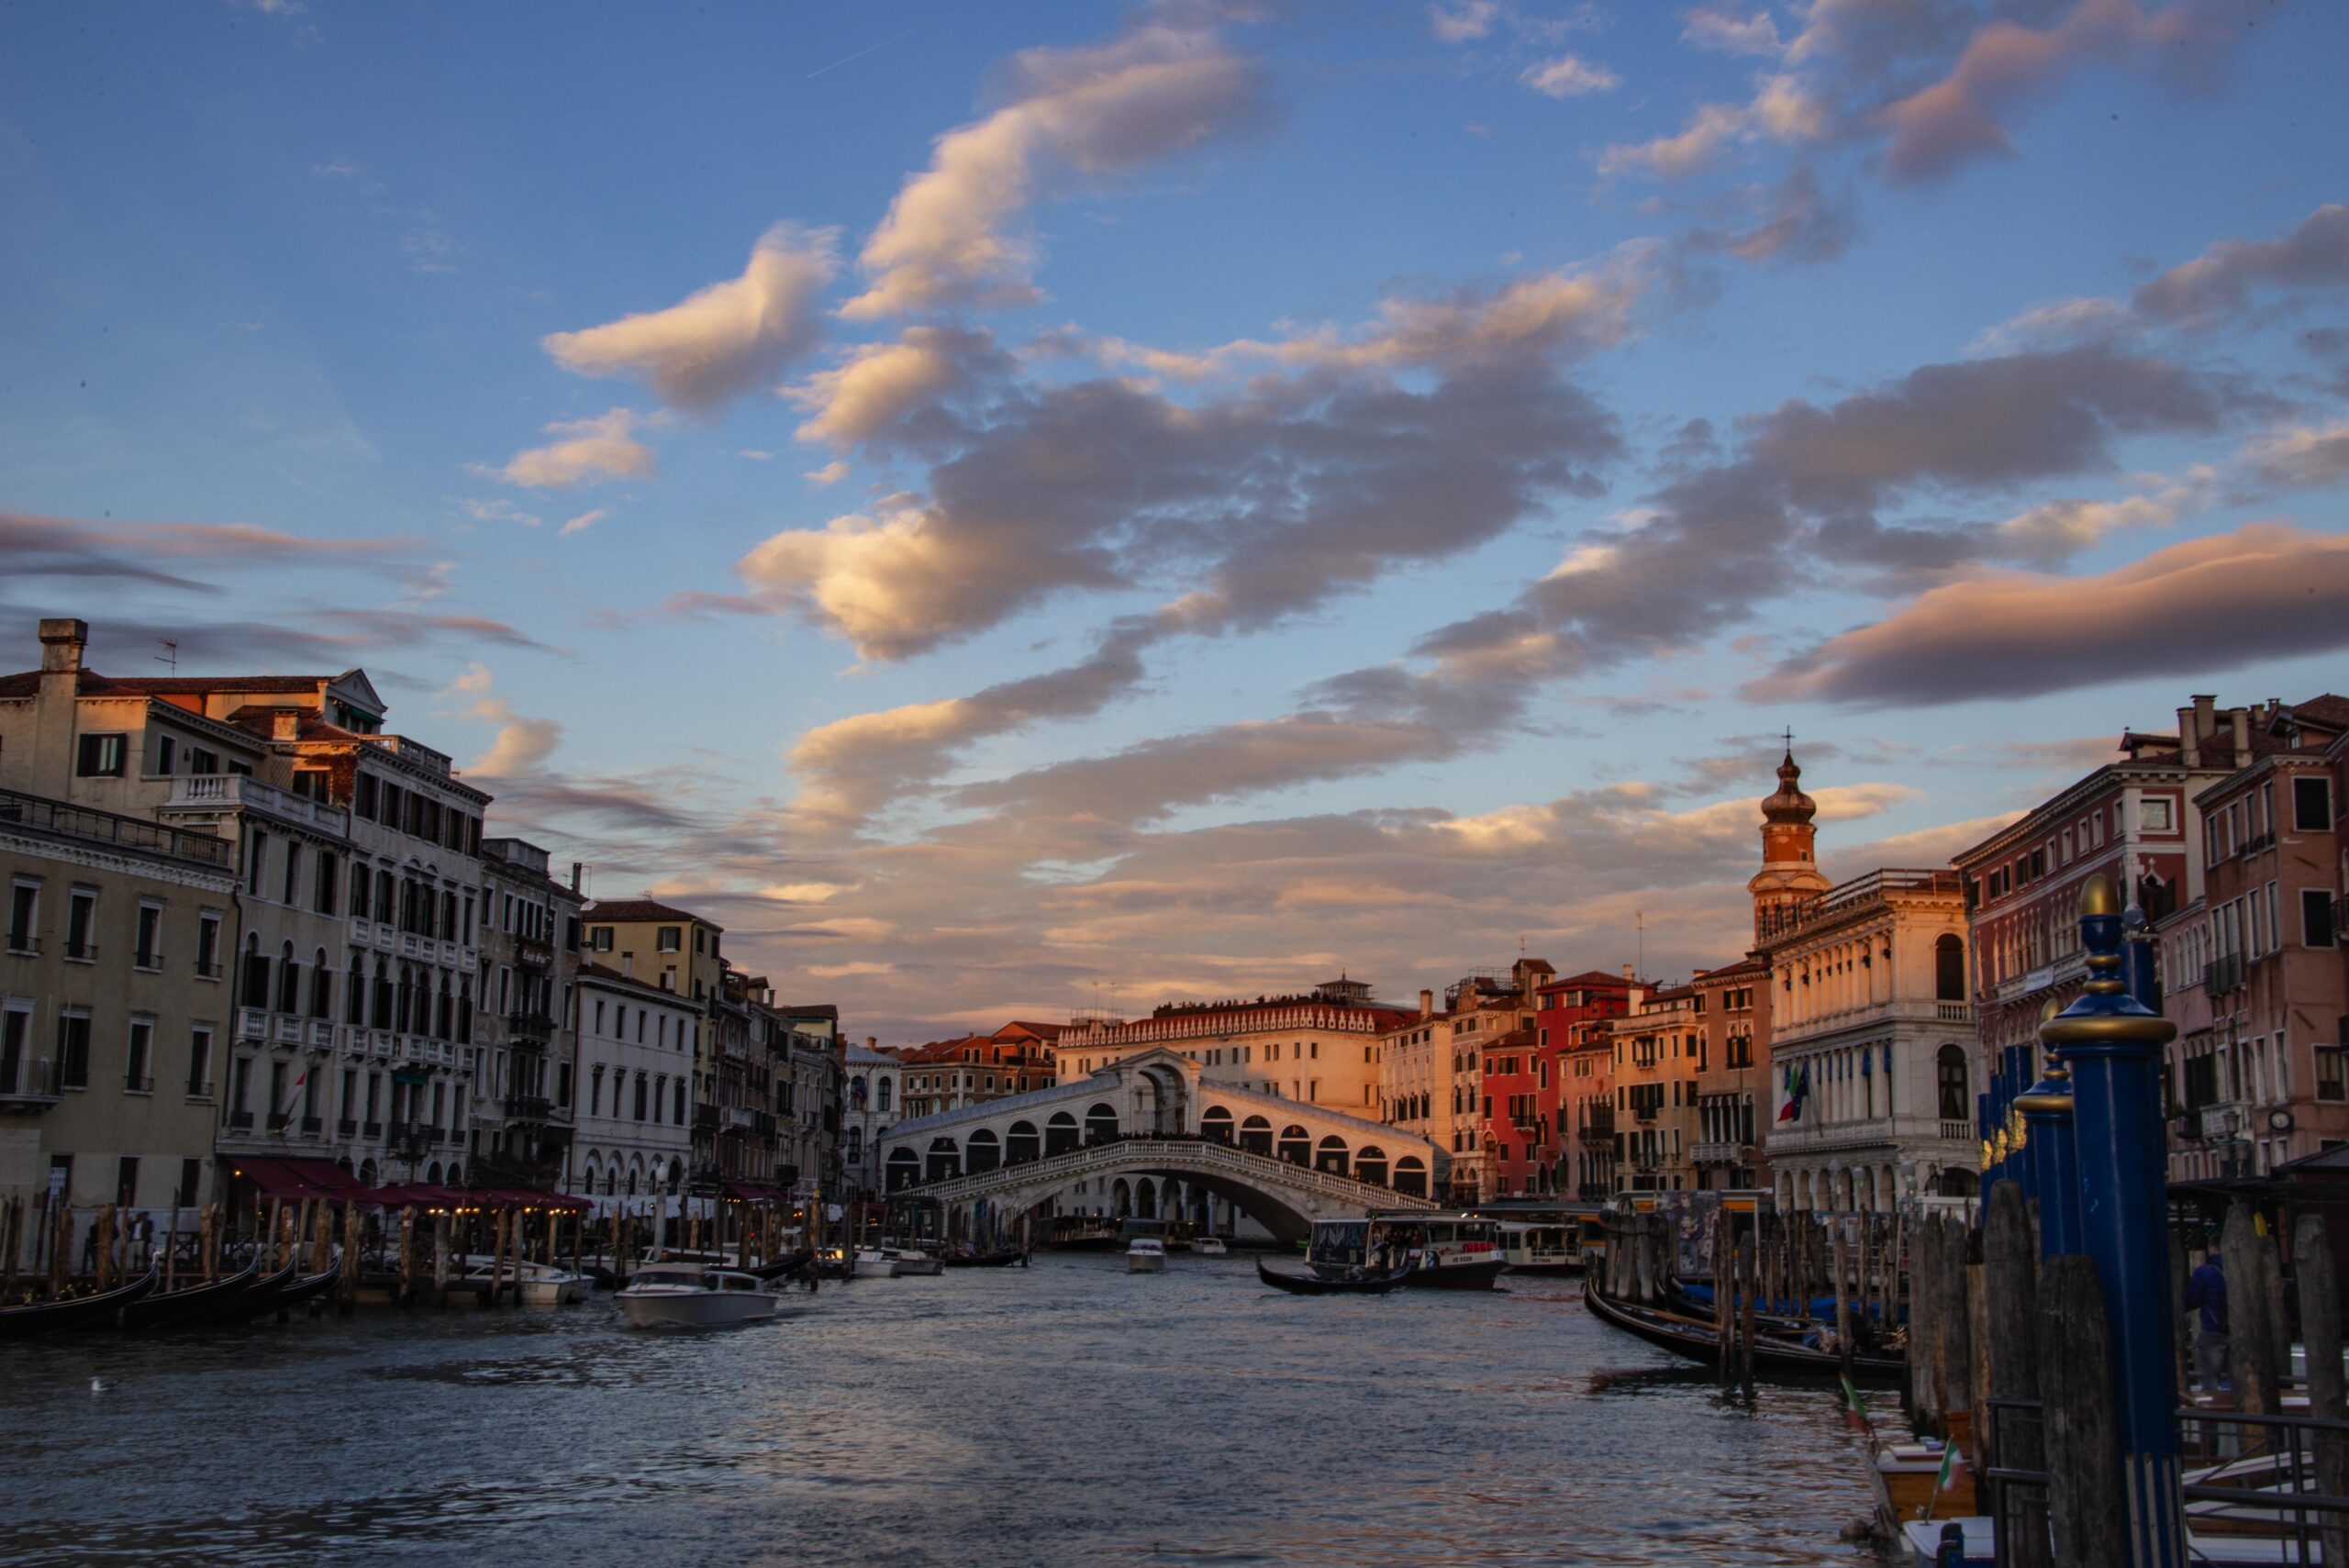 VISIT VENICE, BUT YOU MAY NEED TO REGISTER FIRST